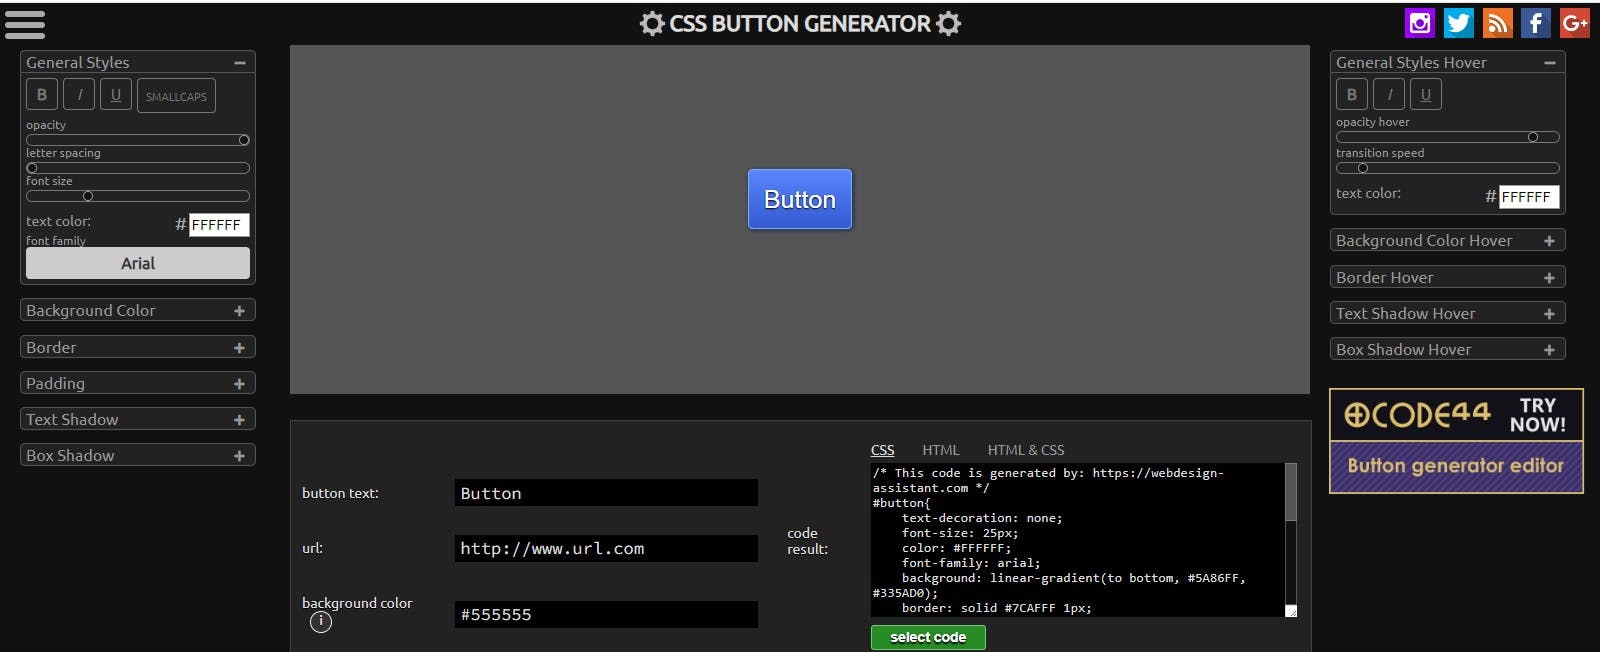 CSS Button Generator — Button generator with hover effect options